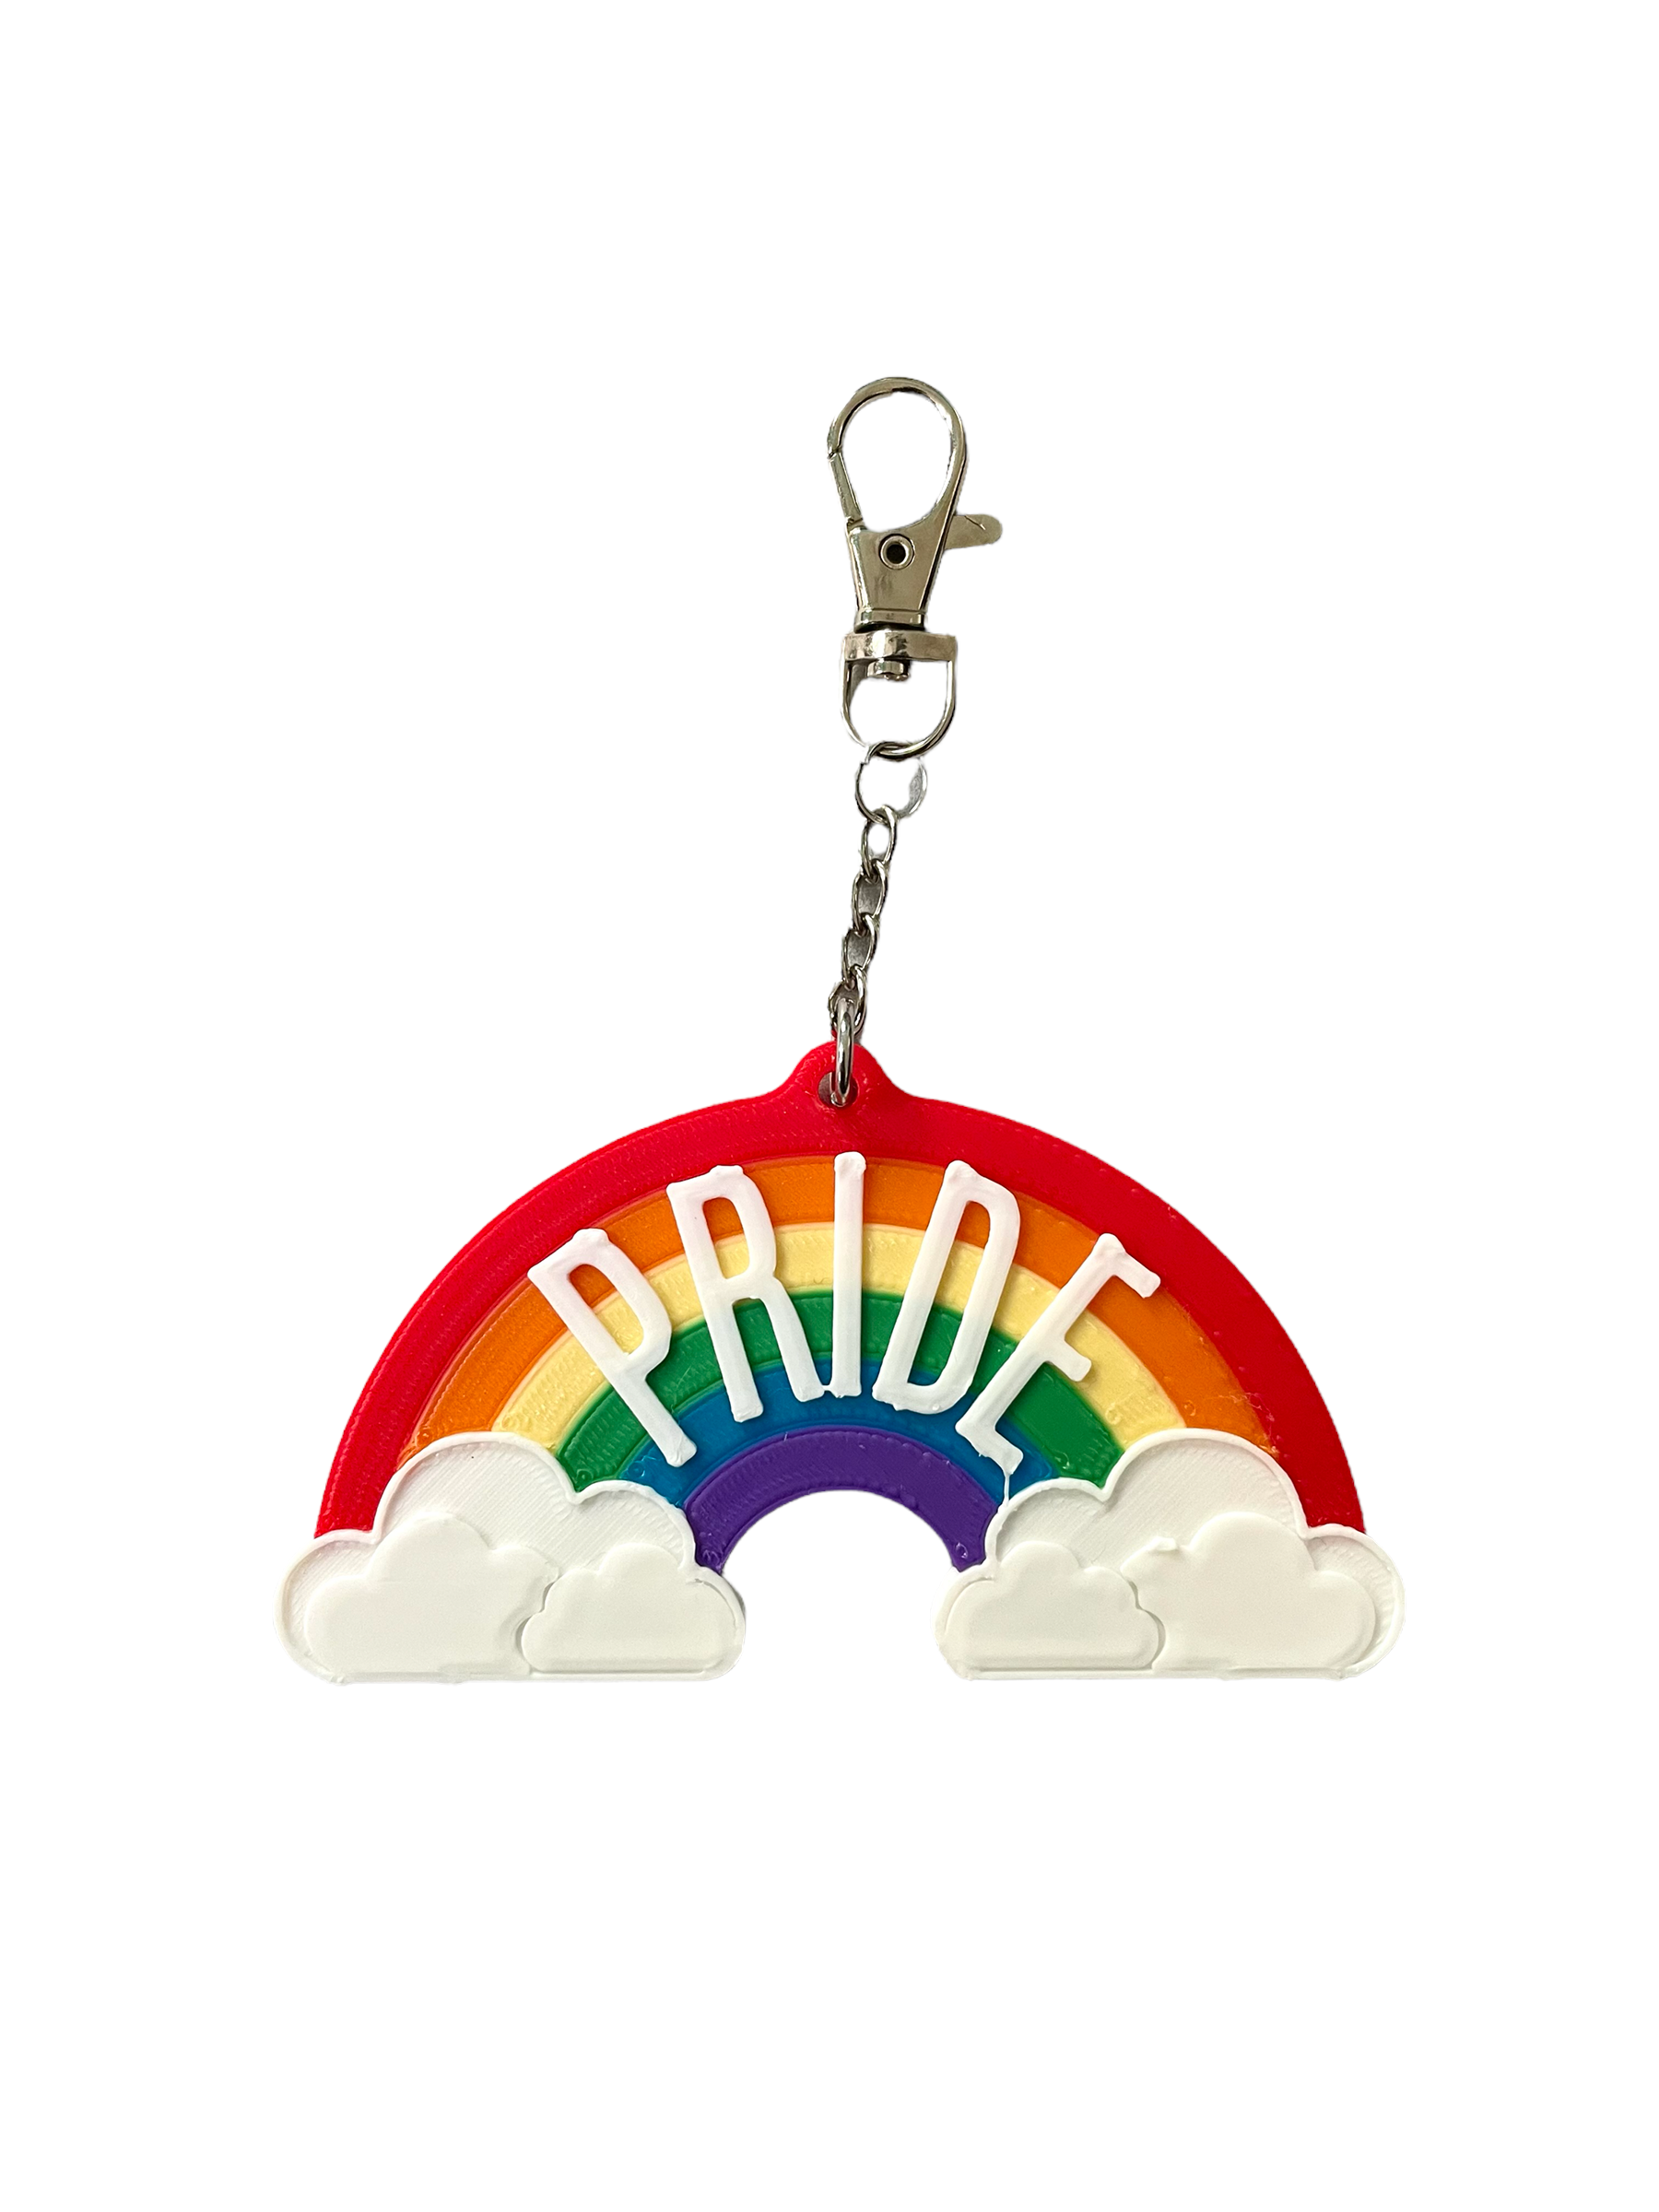 3D Pride Rainbow Arc with Clouds Key Chain